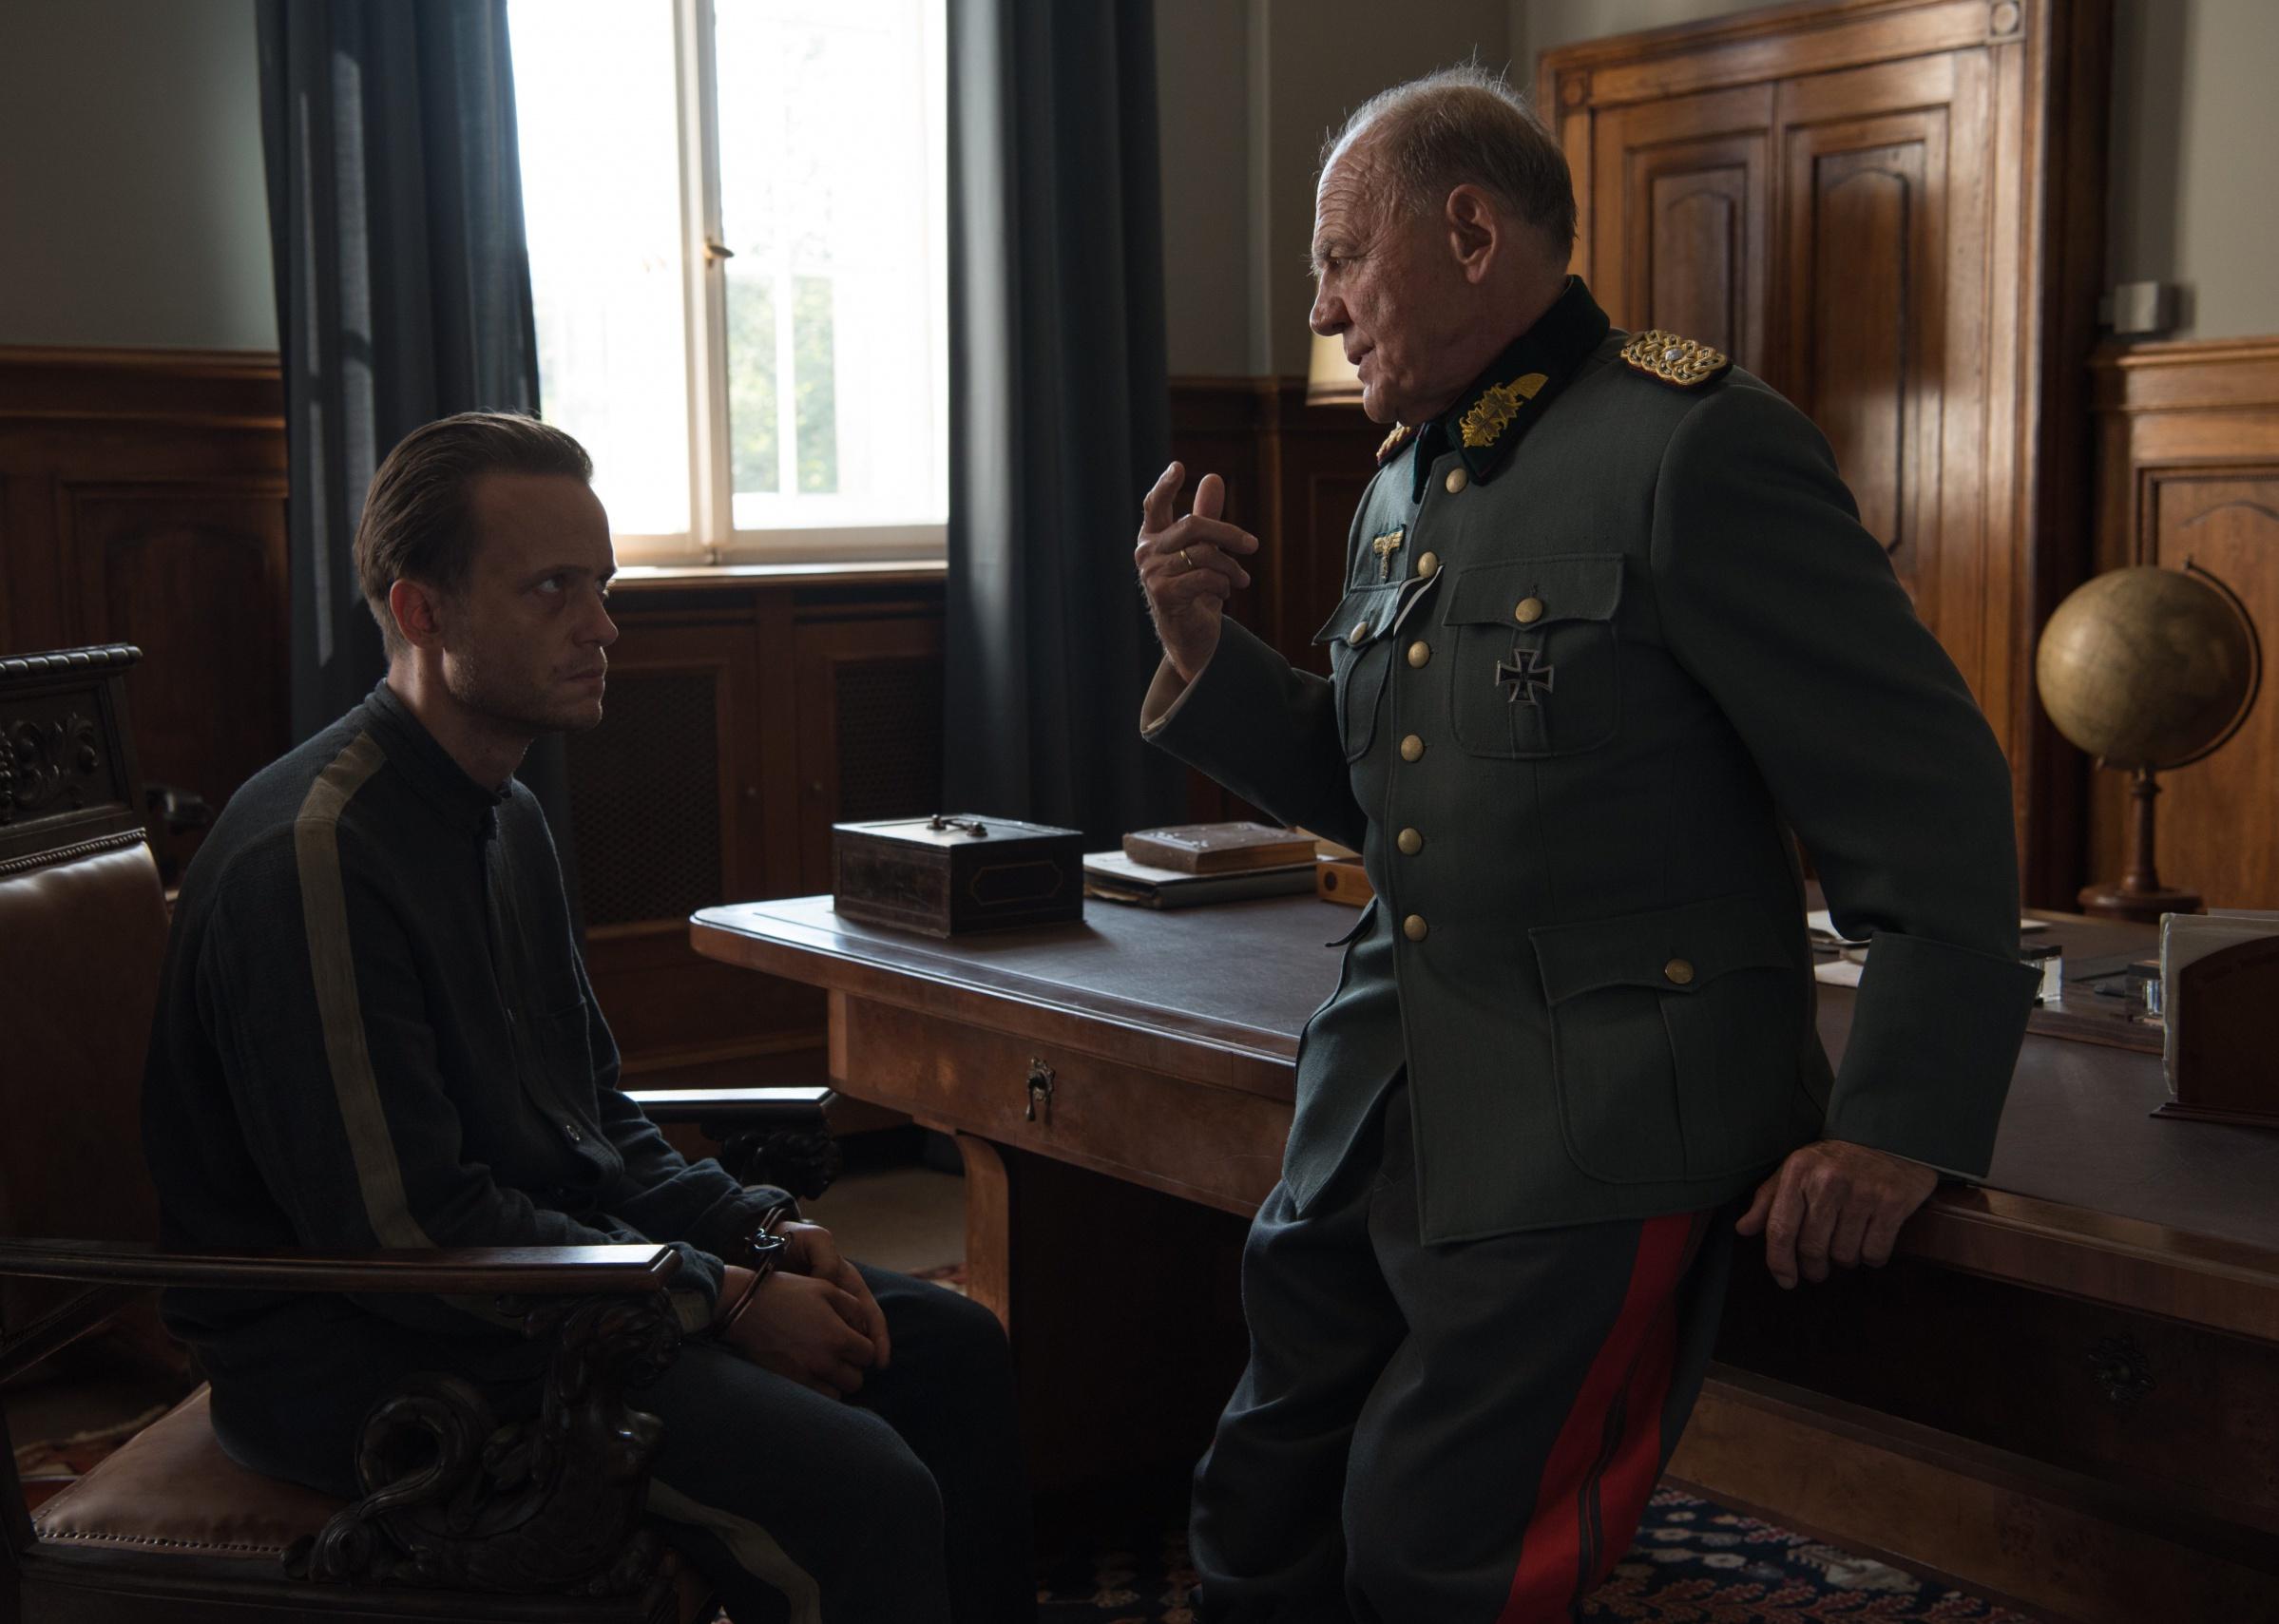 A military officer speaks to a man in handcuffs in a chair.